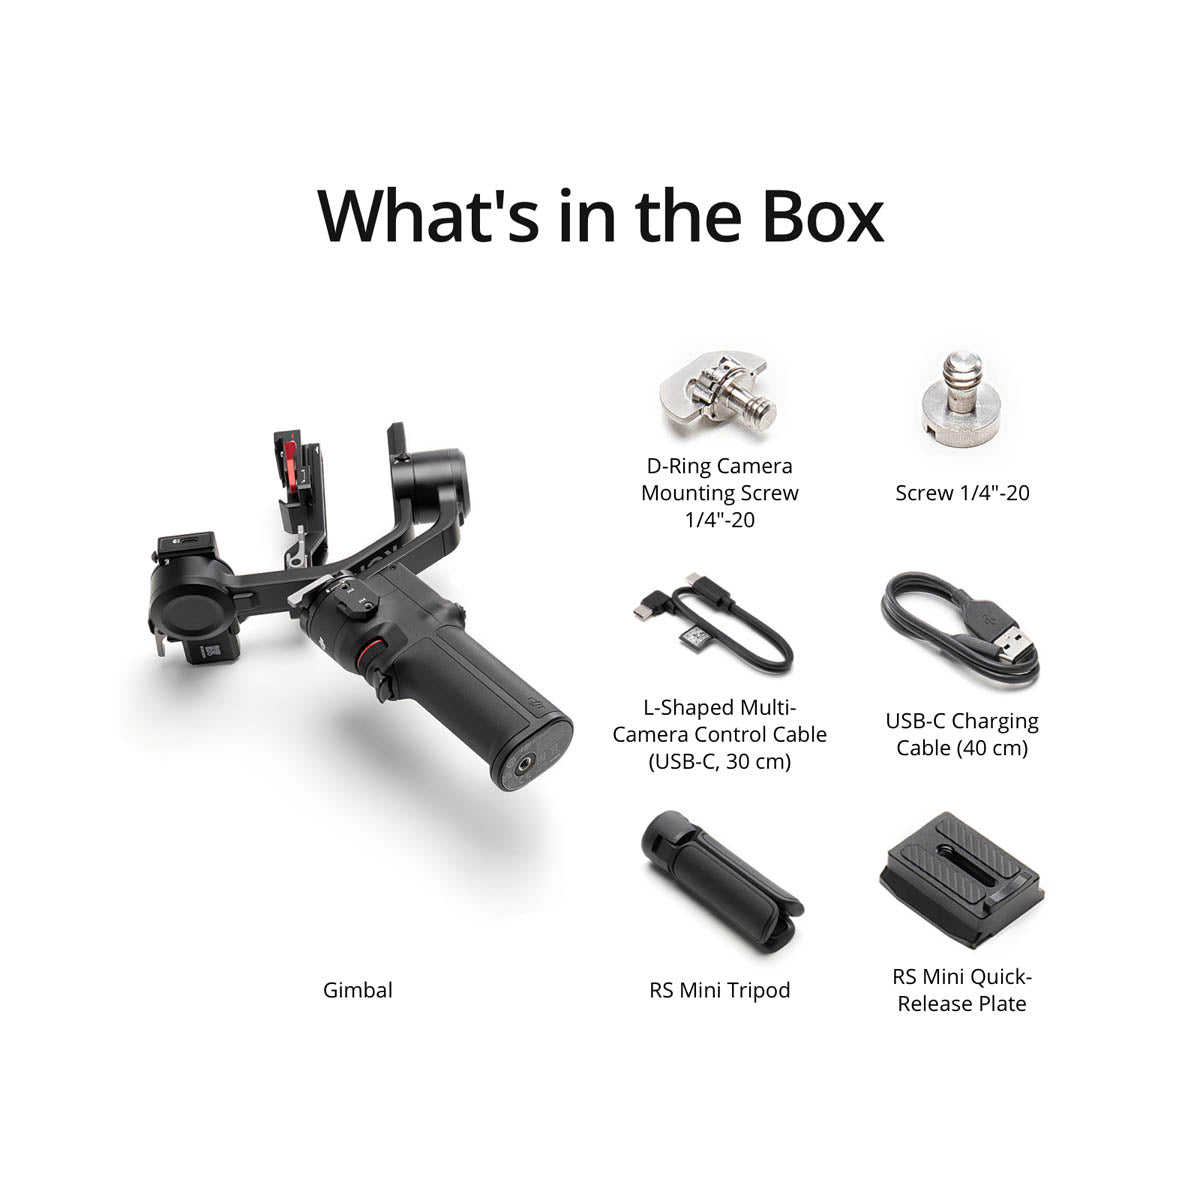 DJI RS 3 Mini Gimbal Stabilizer for Camera 2 kg (4.4 lbs) Tested Payload